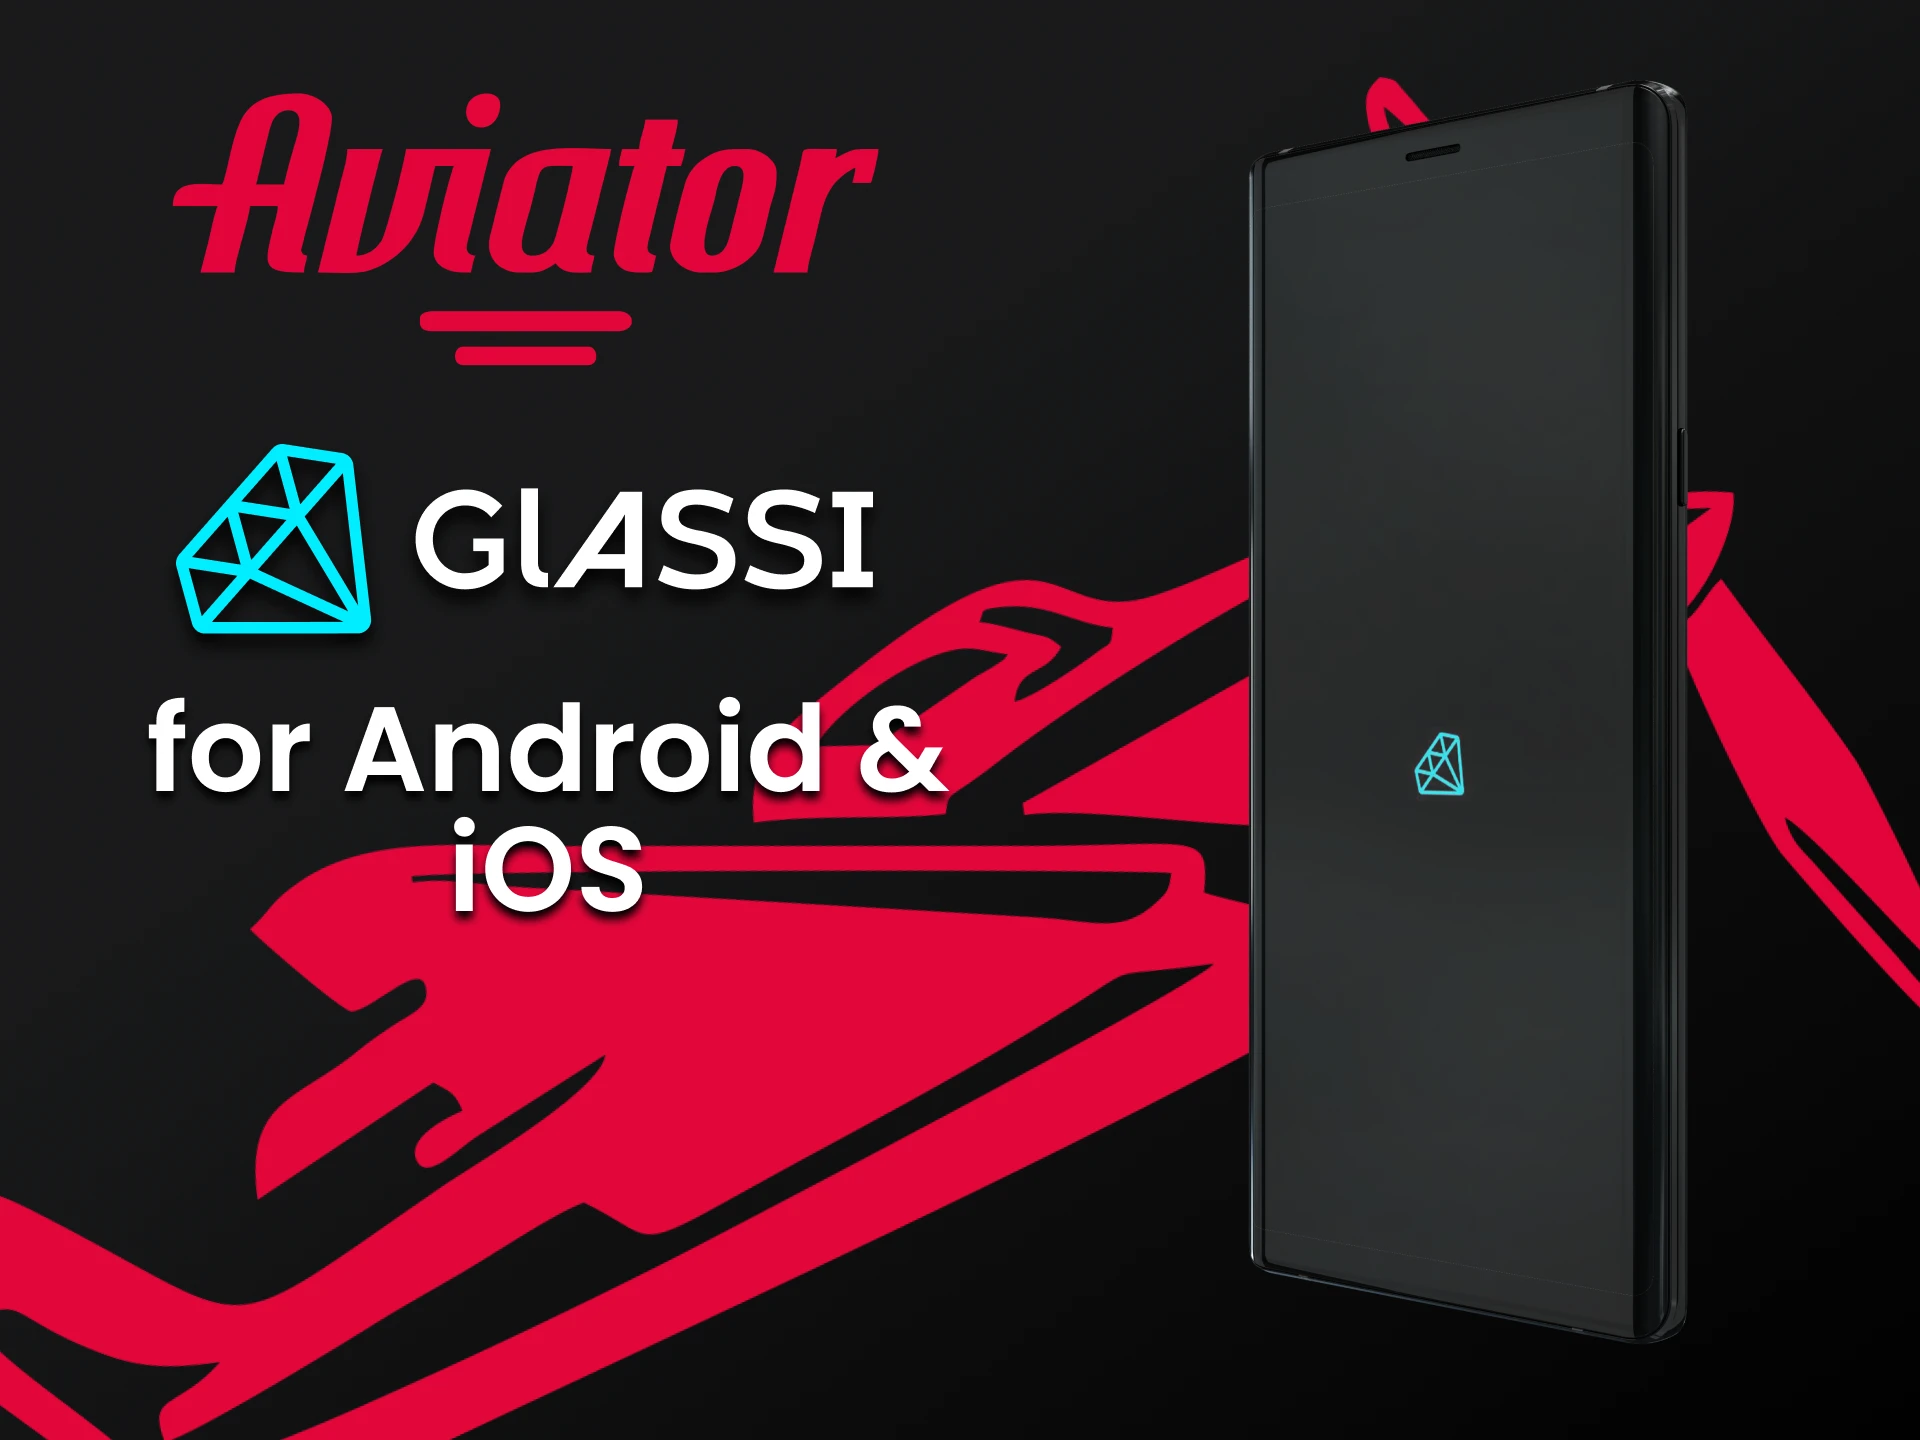 You can play Aviator through the Glassi Casino application.